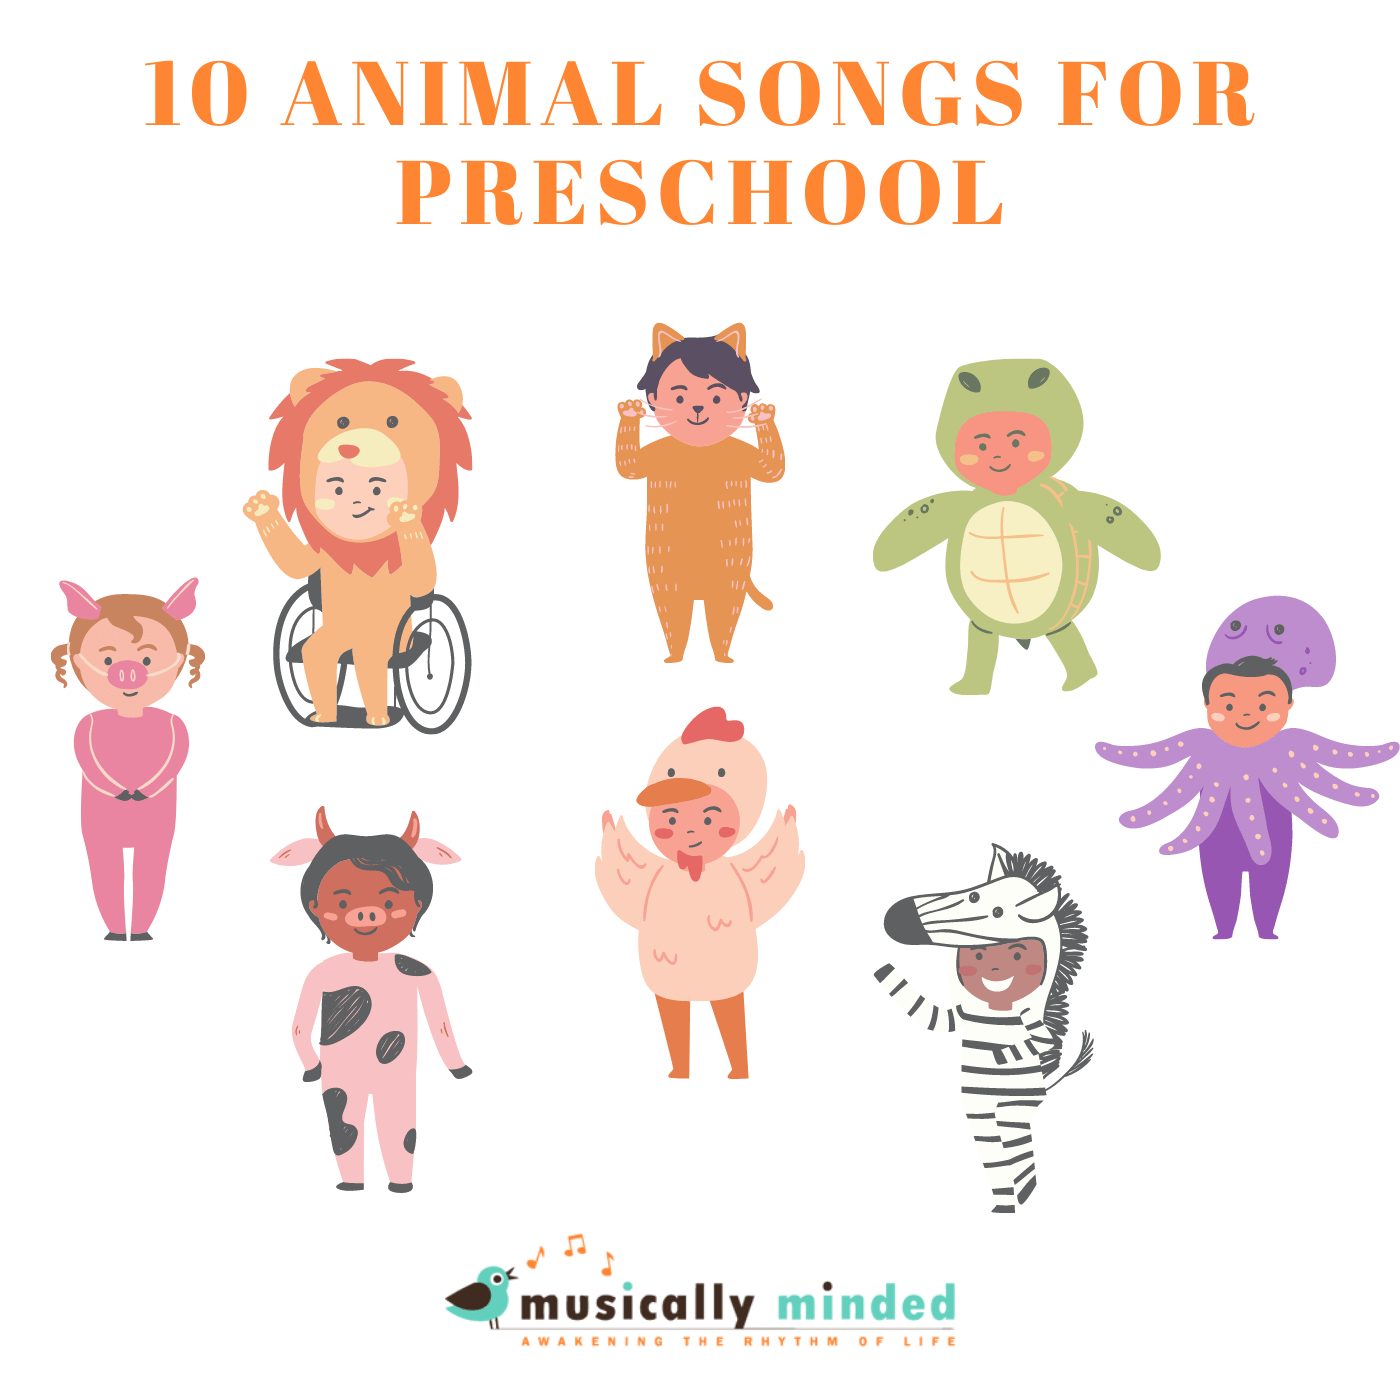 10 Animal Songs for Preschool - Musically Minded